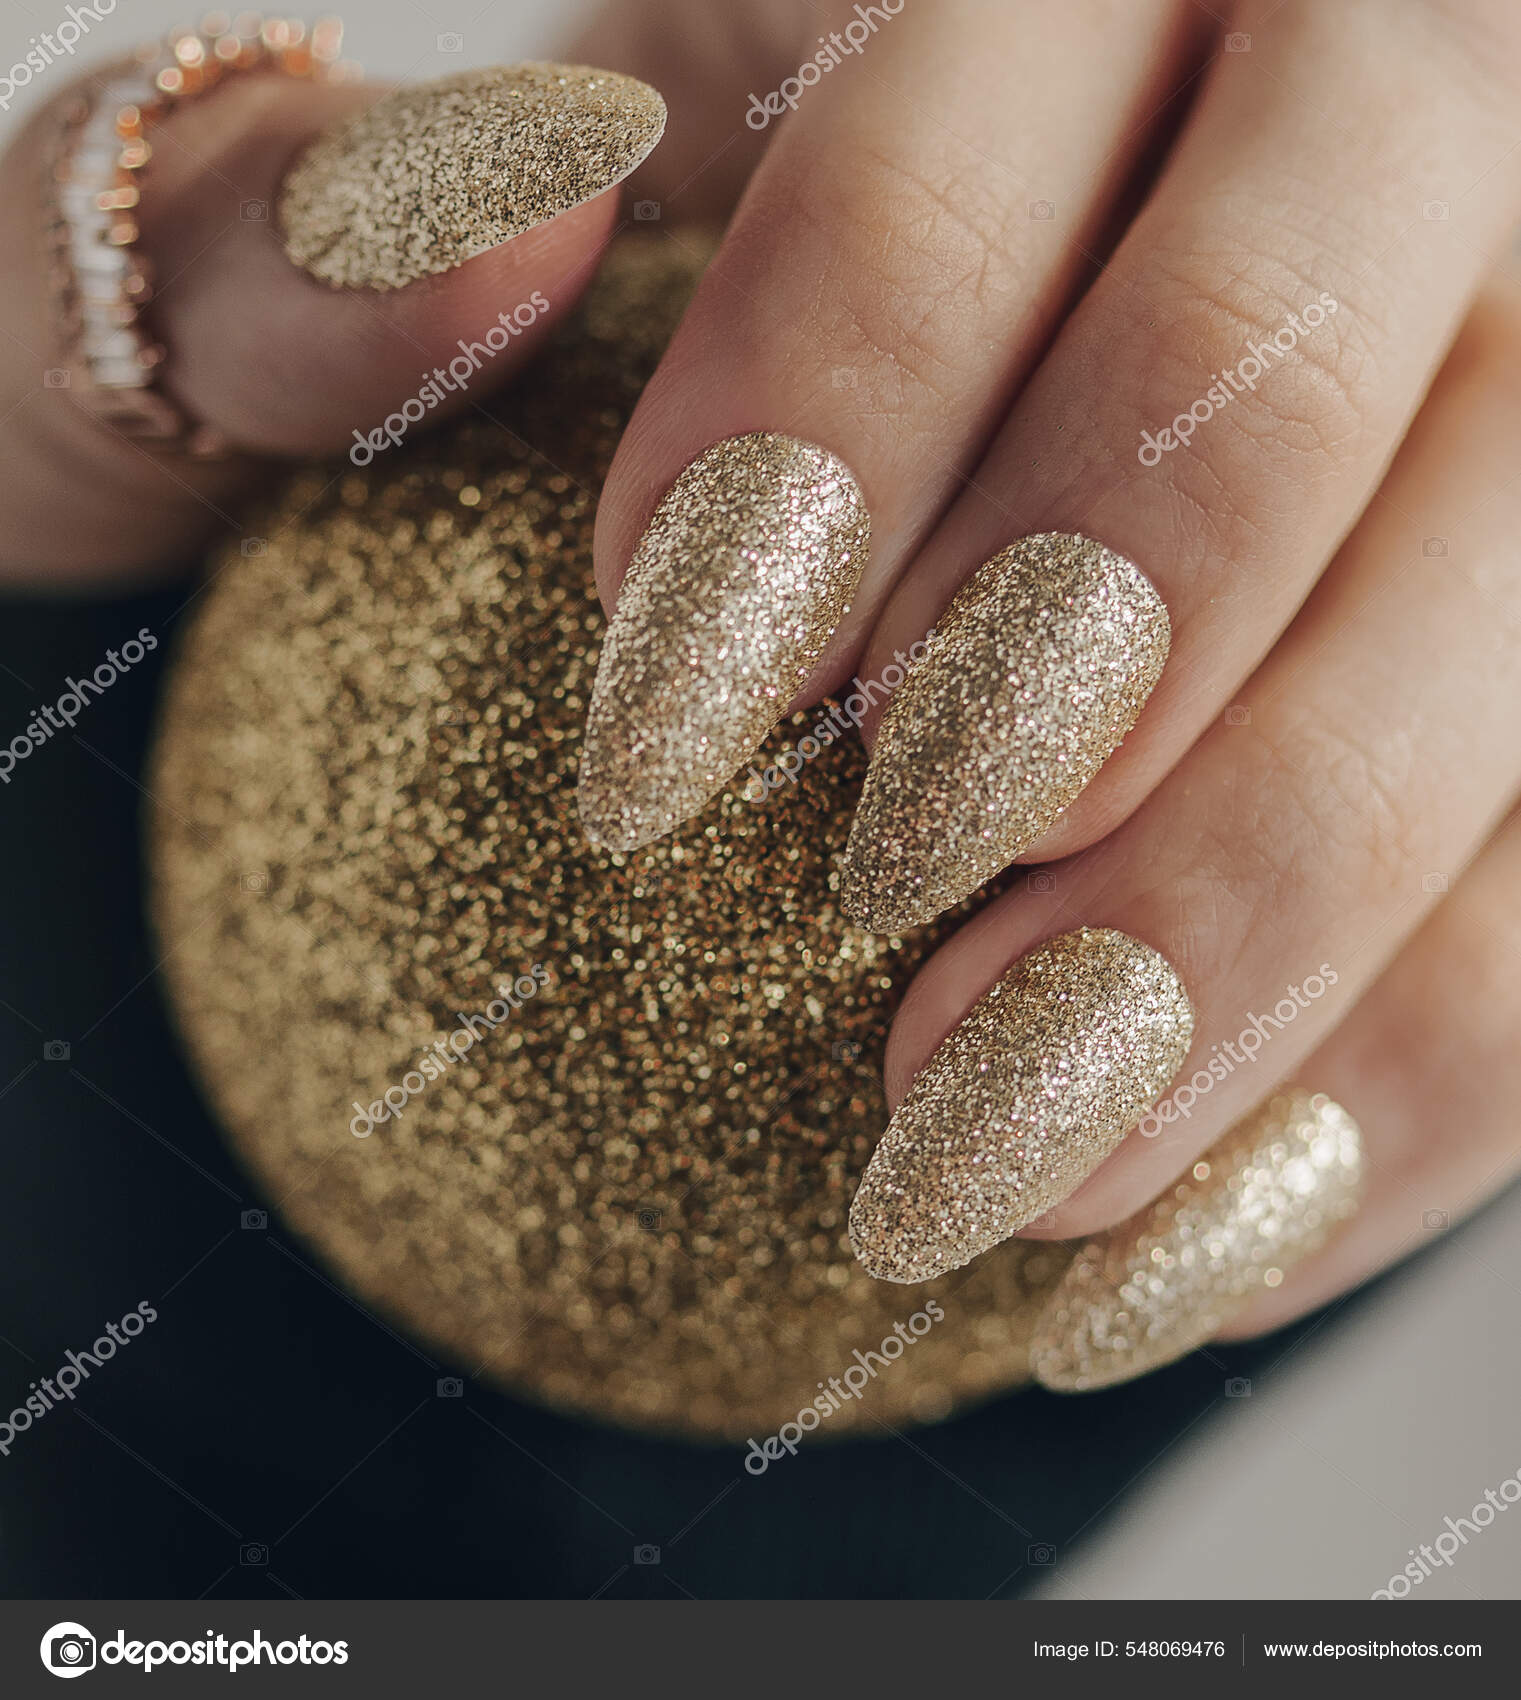 Wedding Nail Art: The Latest Trend For Brides!